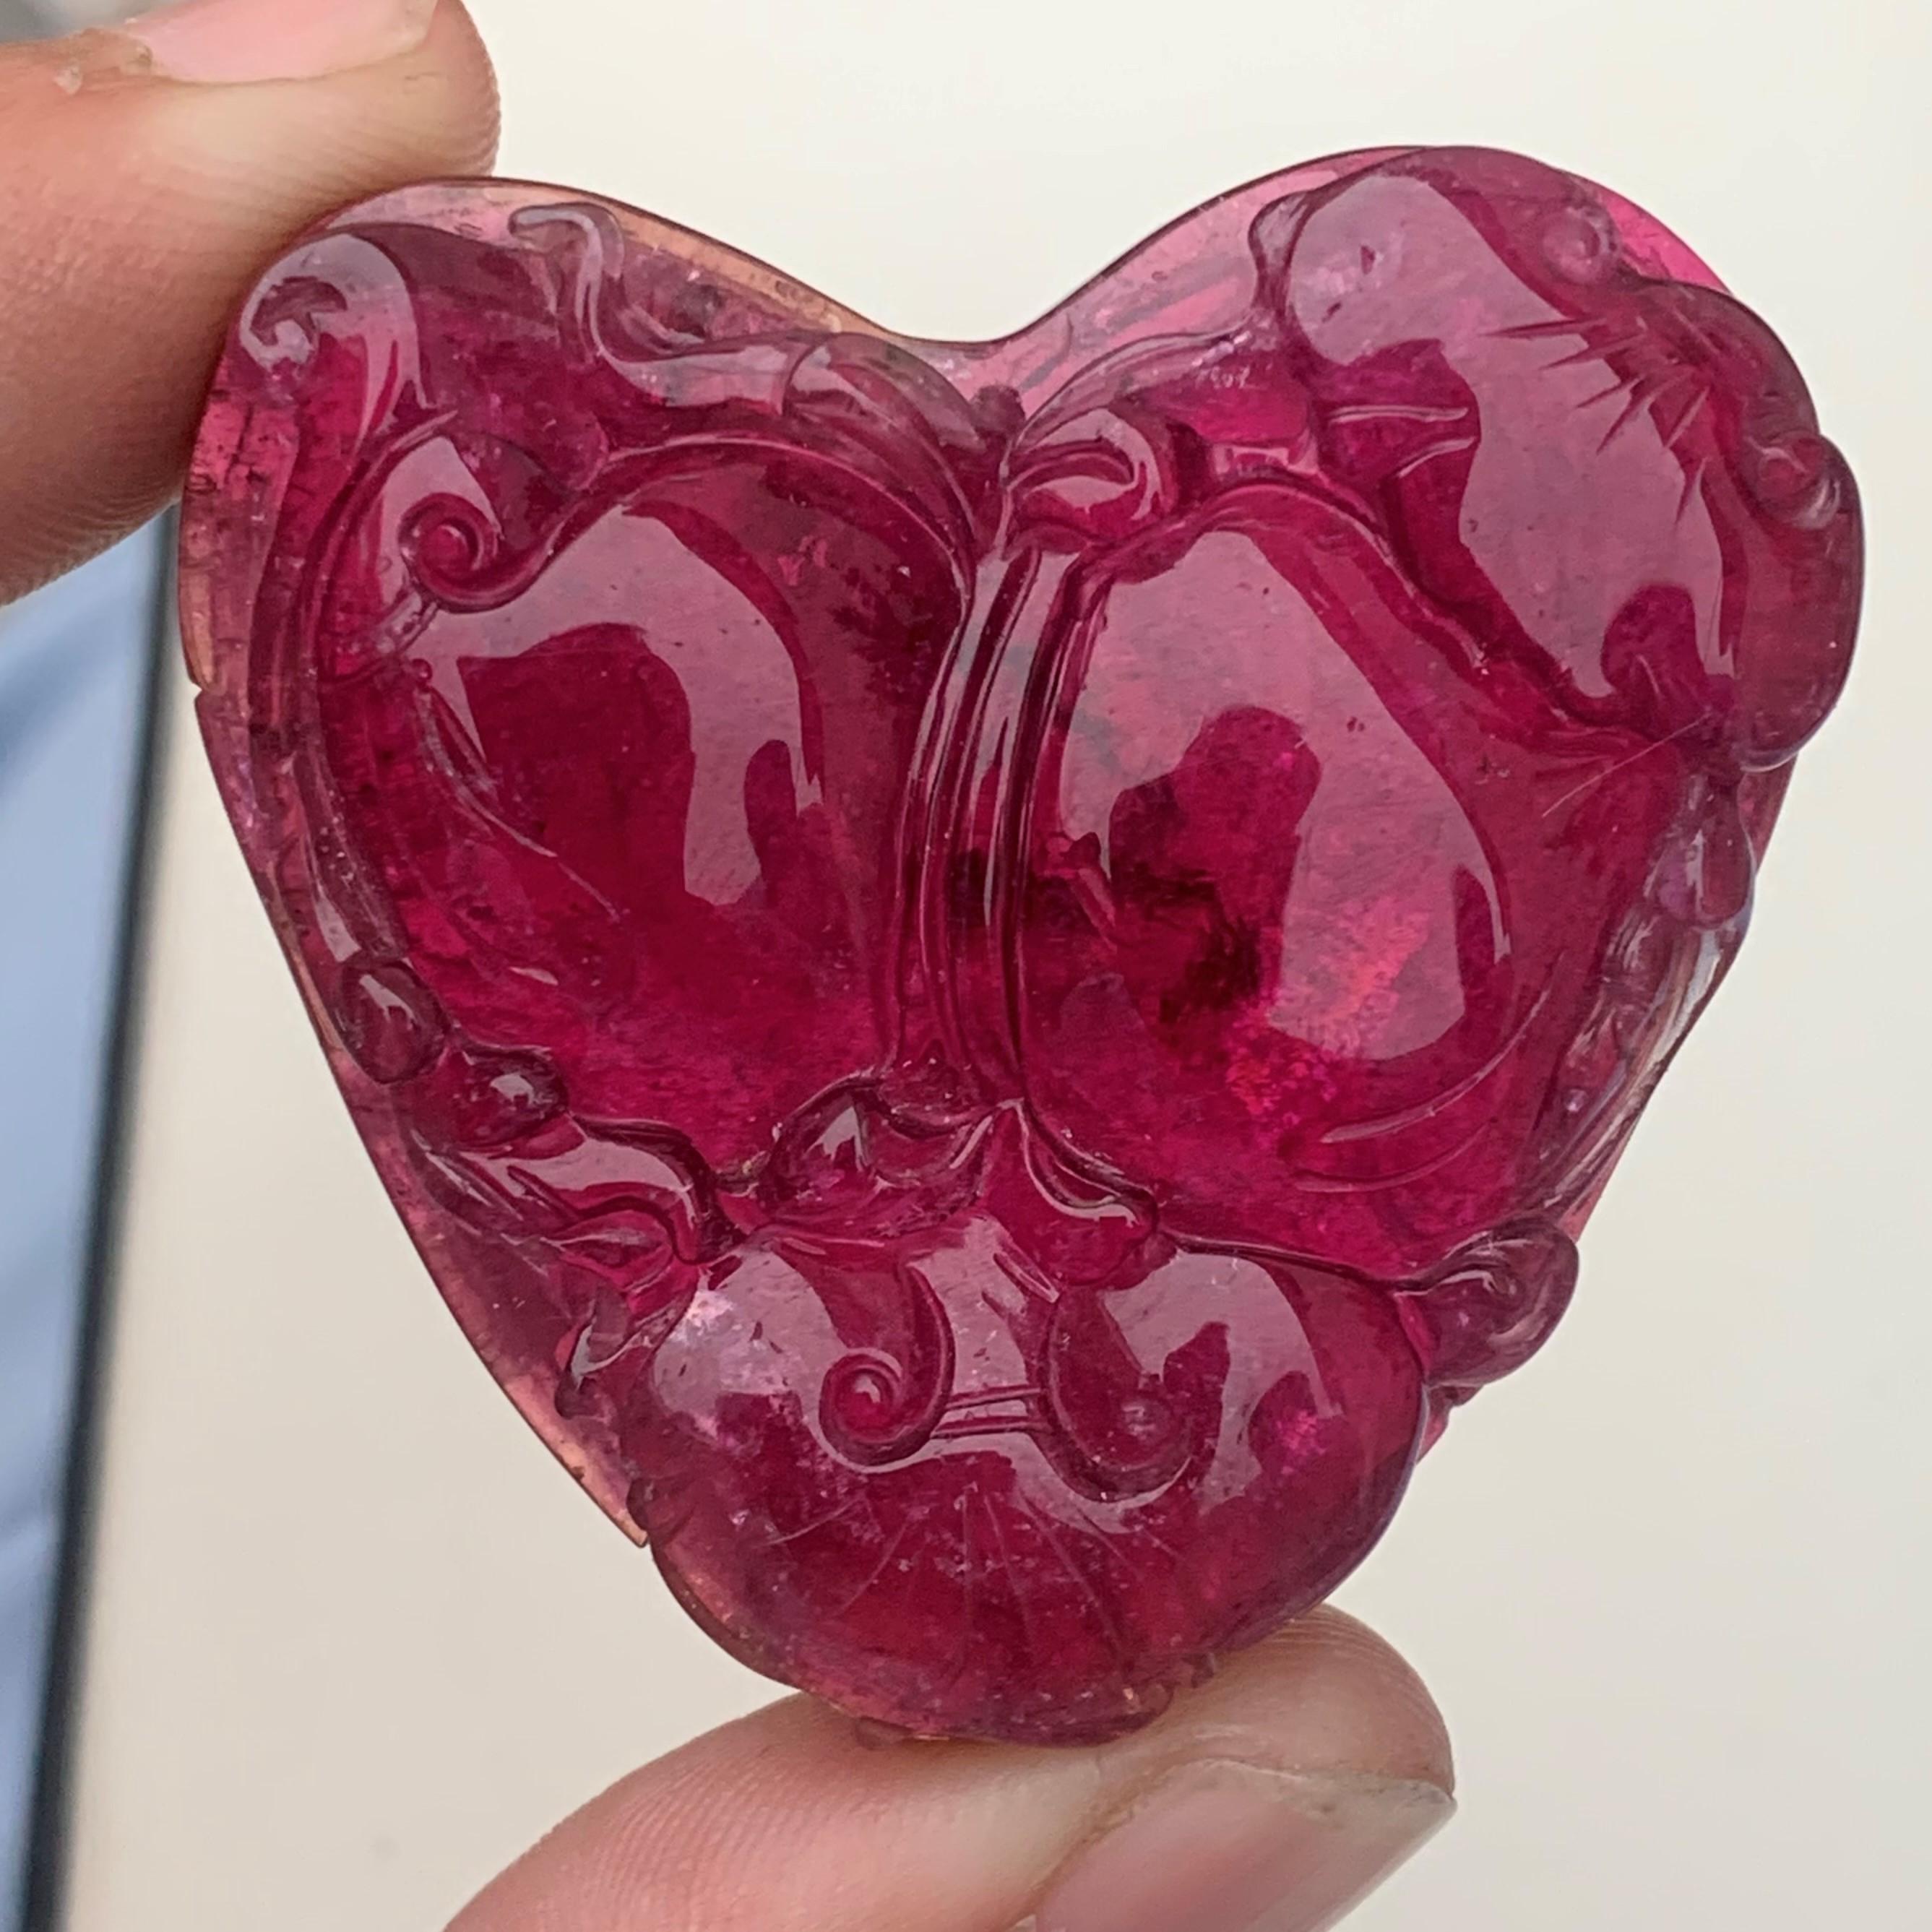 Gemstone Type :  Rubellite Tourmaline
Weight : 197.45 Carats
Dimensions : 45x45x11 Mm
Origin : Africa 
Clarity :  SI
Shape: Heart 
Color: Pink Red
Certificate: On Demand
The rubellite is a transparent gemstone from the colorful family of the